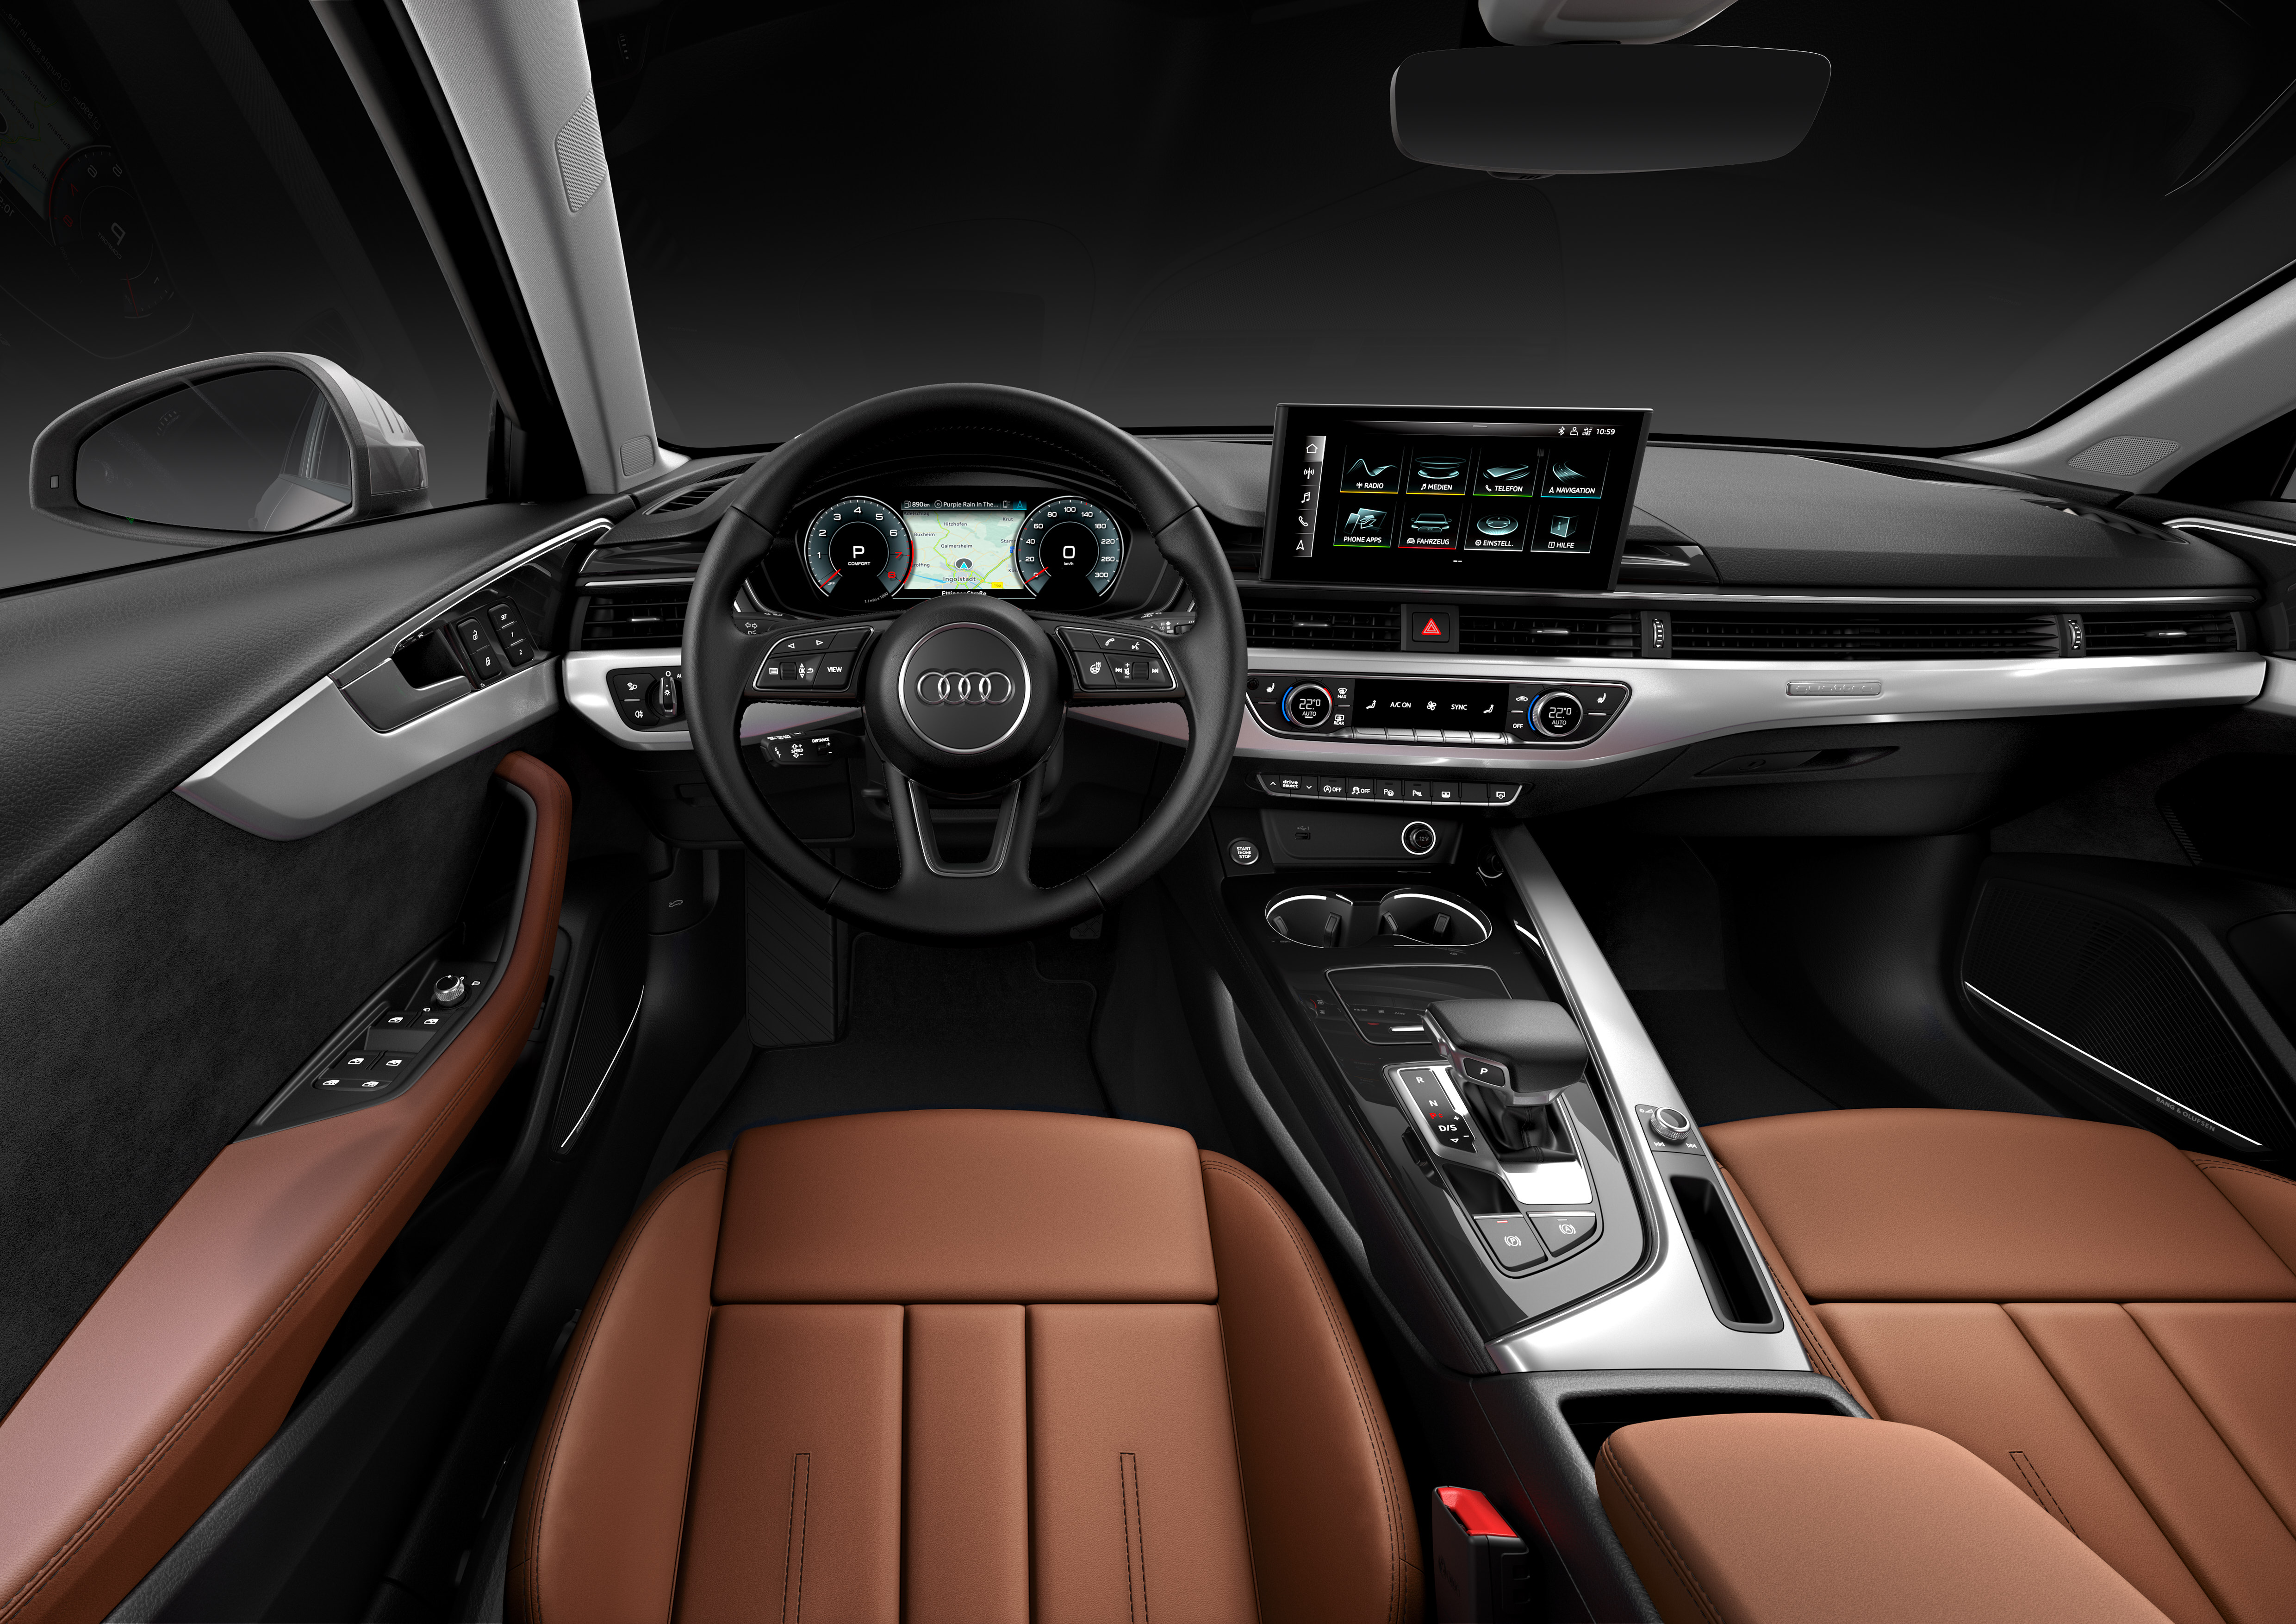 A new infotainment system features a wider screen than before